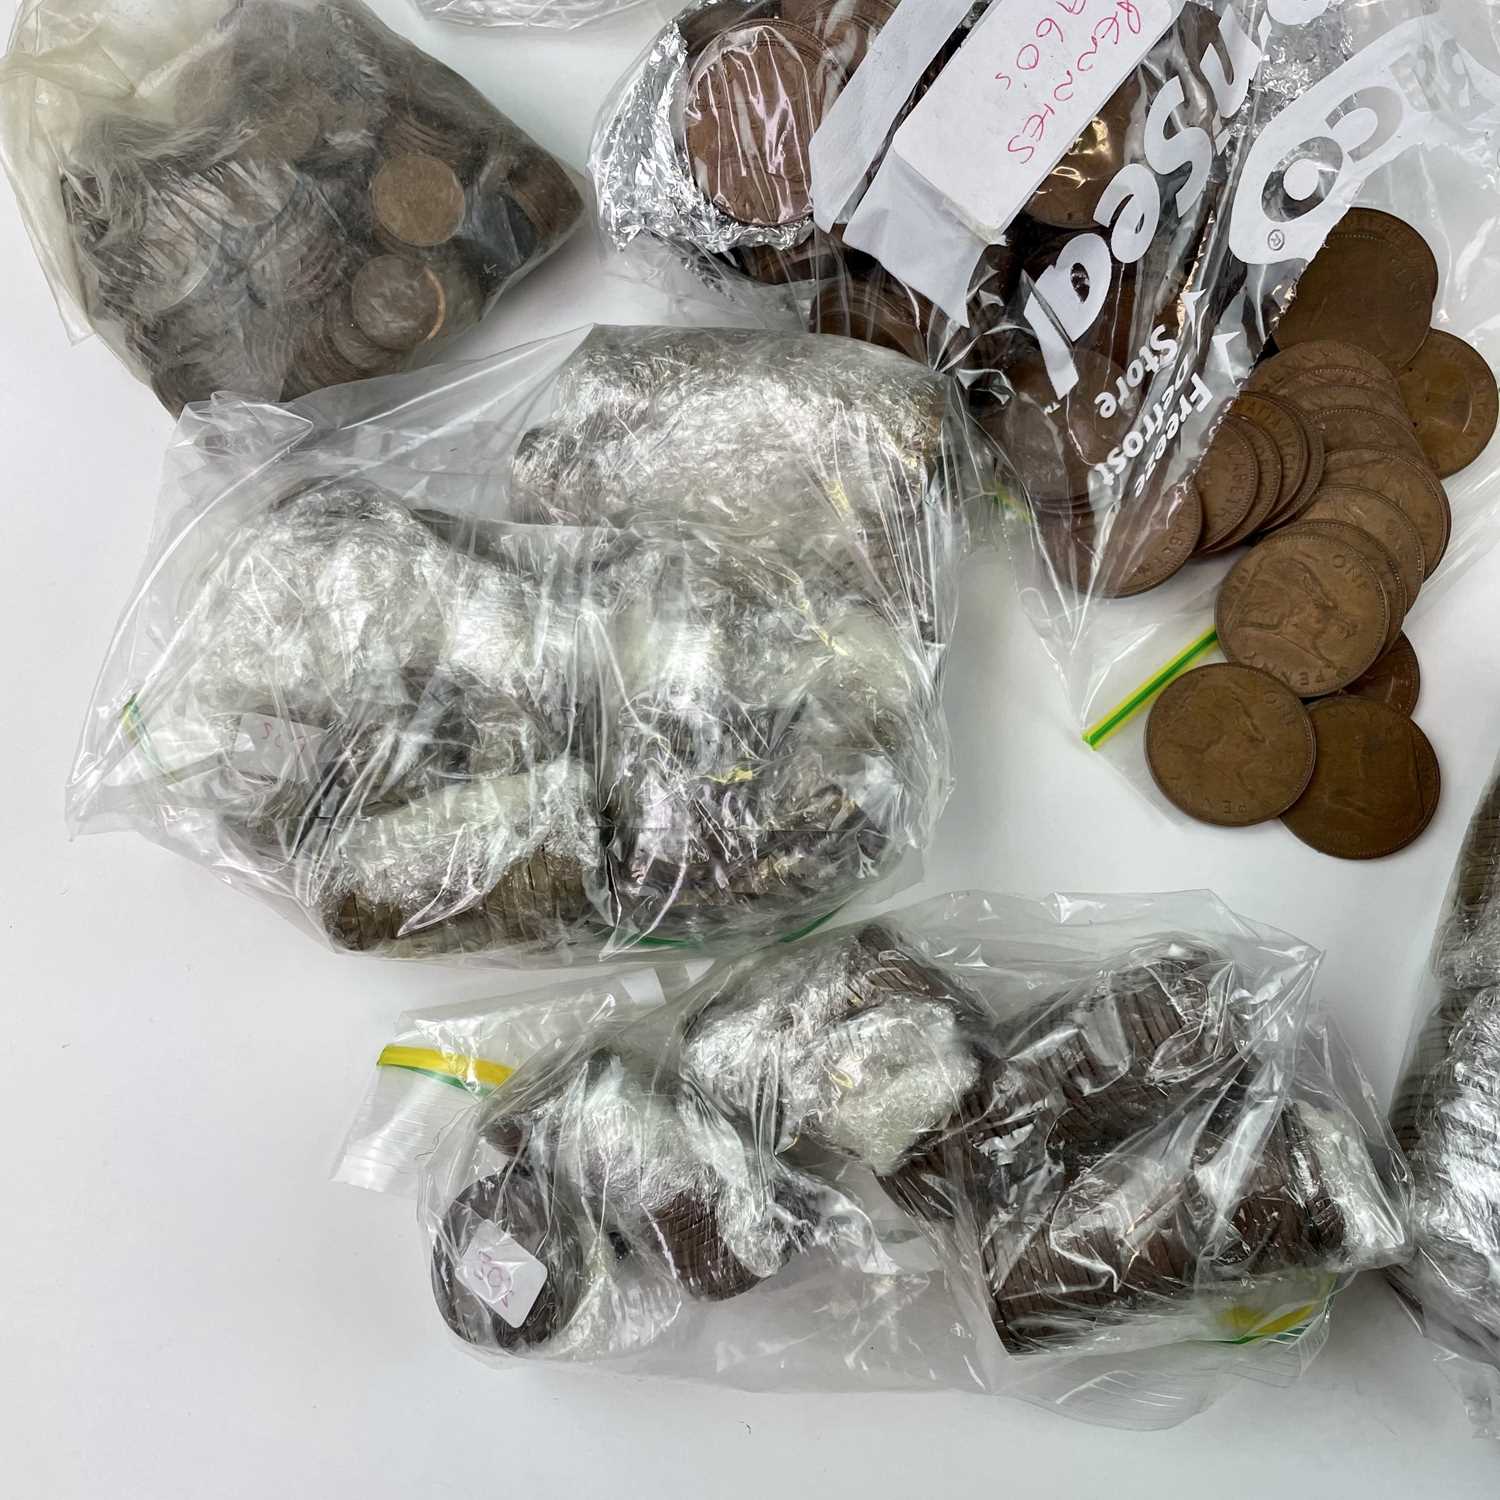 G.B. Pre 1947 Silver Coins and large quantity of Pre Decimal Coins. Comprising a bag containing £3. - Image 8 of 11